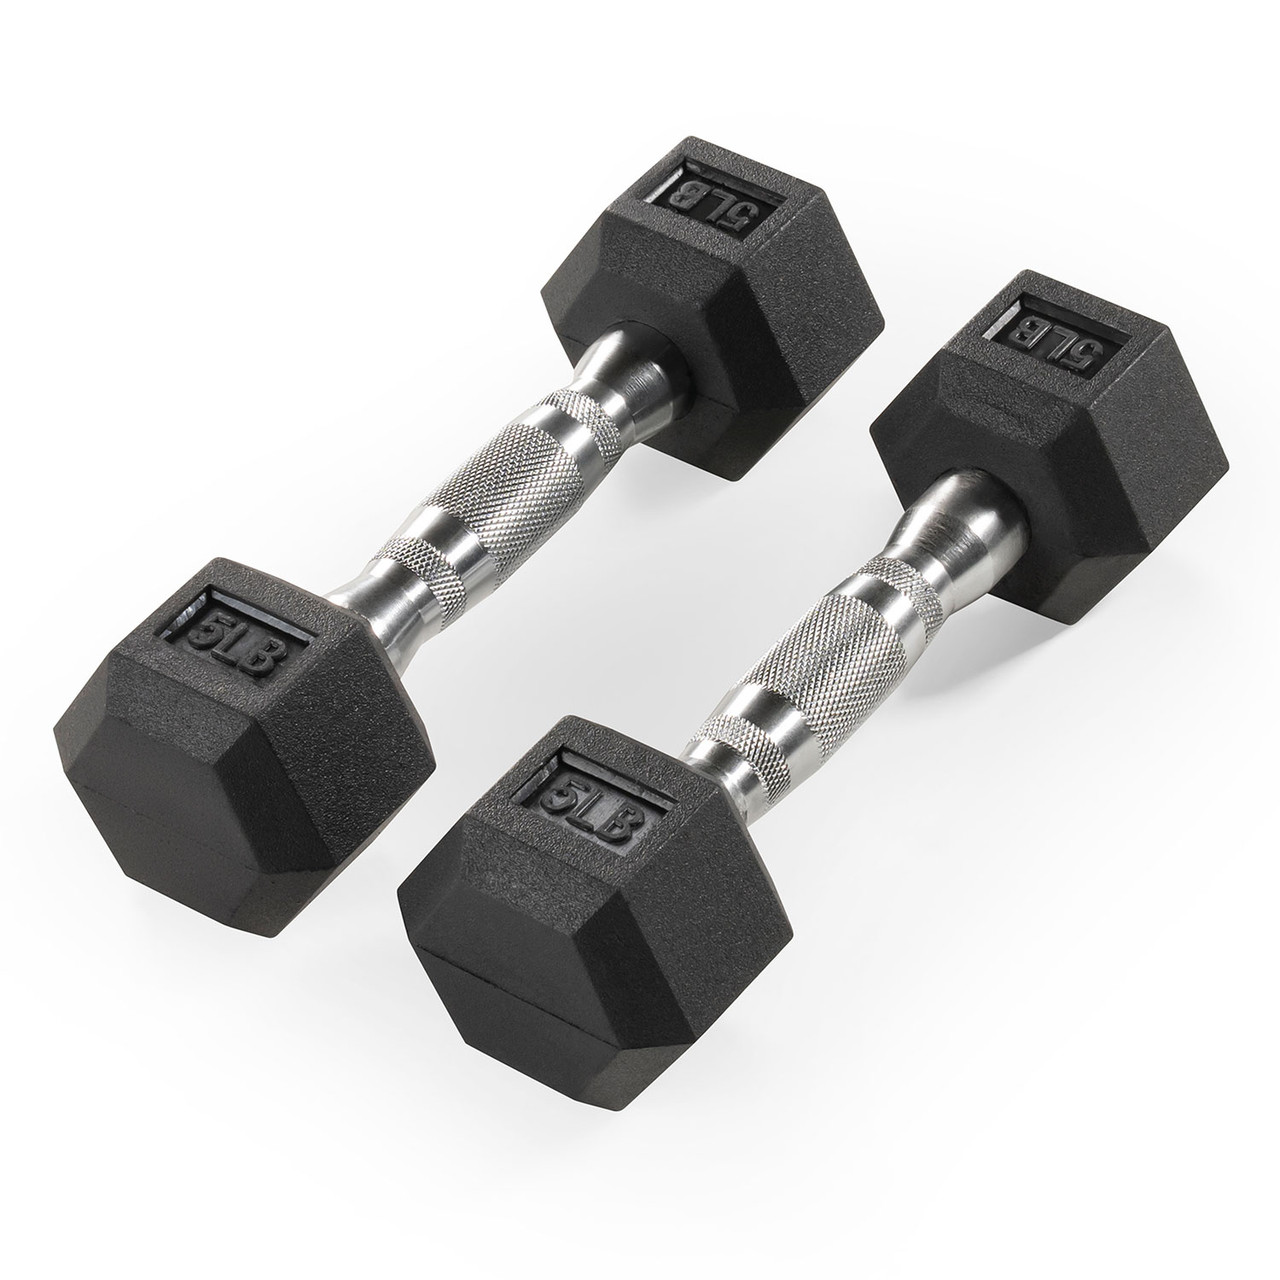 https://cdn11.bigcommerce.com/s-r2fl439k1s/images/stencil/1280x1280/products/489/2847/The_Marcy_5_LB._Pair_of_Rubber_Hex_Dumbbells_RHDB-005_is_the_best_free_weight_for_your_high_intensity_interval_body_building_training__87455.1660257477.jpg?c=2